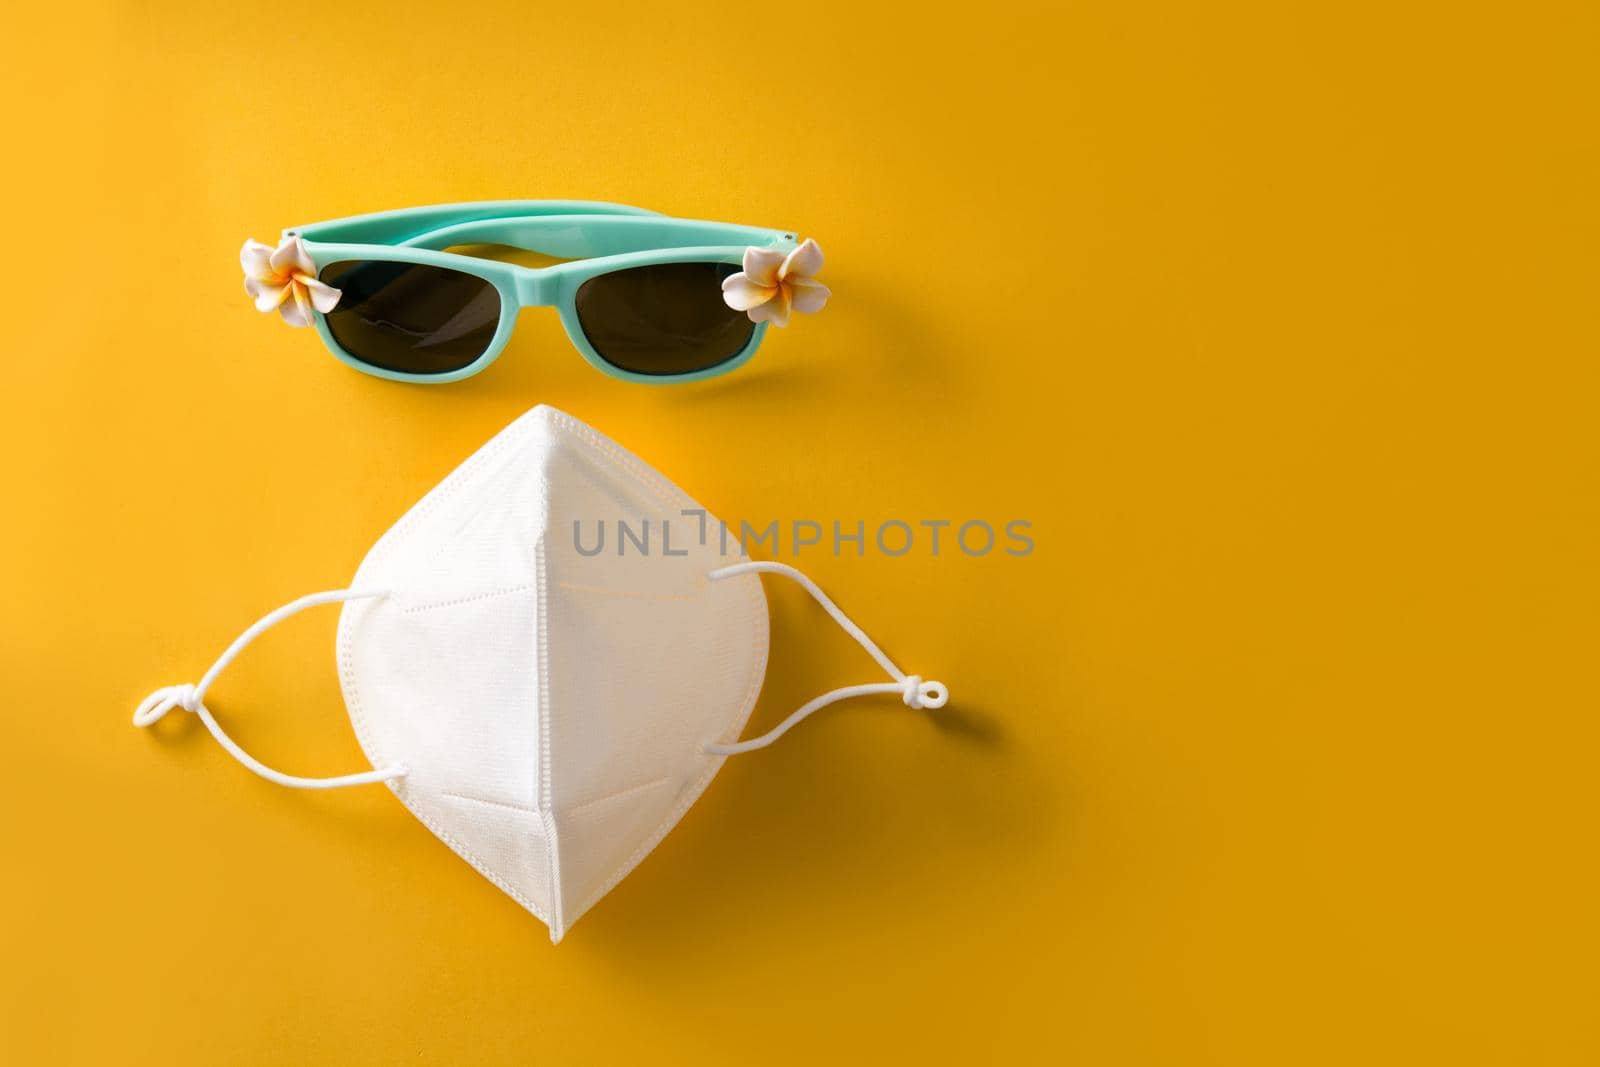 Sunglasses and protective face mask on yellow background. COVID-19 summer concept.